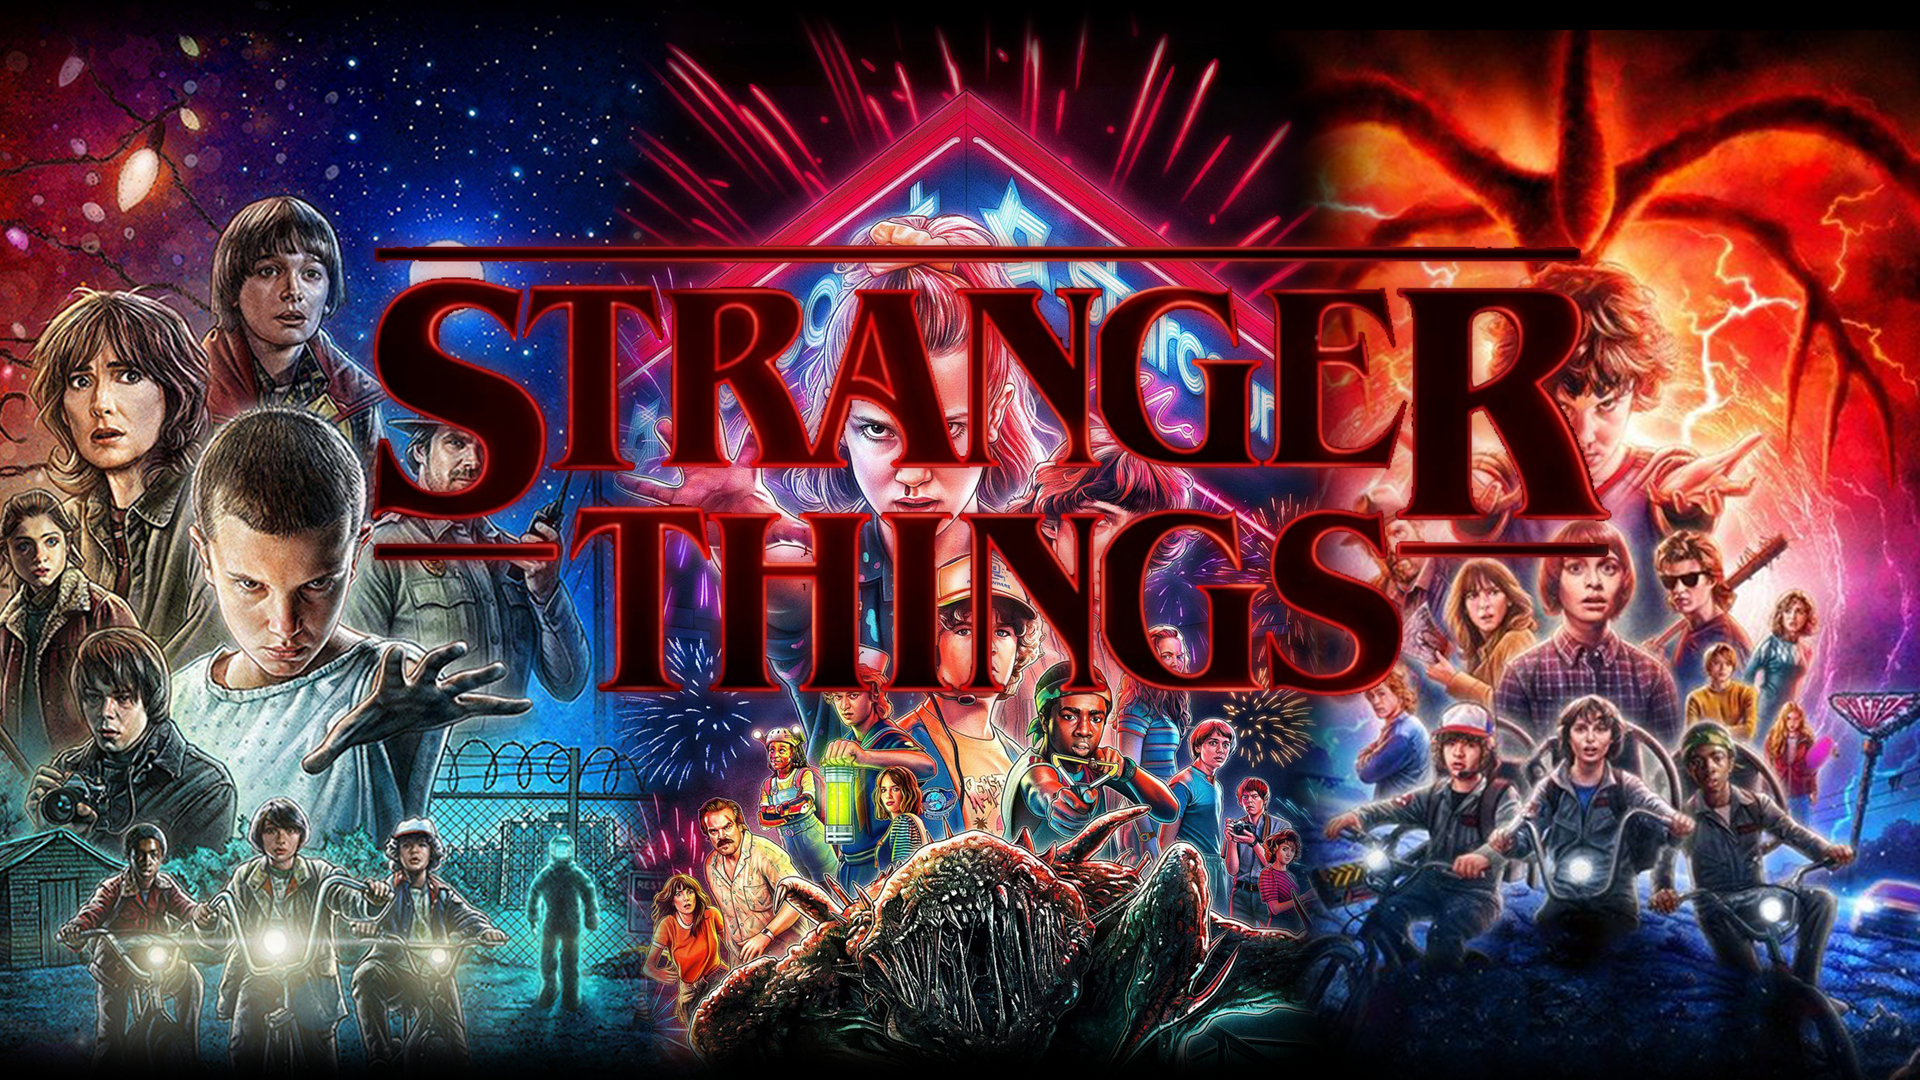 Free download Stranger things S1 S2 S3 1920x1080 wallpapers 1920x1080 for  your Desktop Mobile  Tablet  Explore 43 S3 Wallpapers  Samsung Galaxy  S3 Wallpapers 720x1280 Galaxy S3 Wallpaper Galaxy S3 Wallpapers